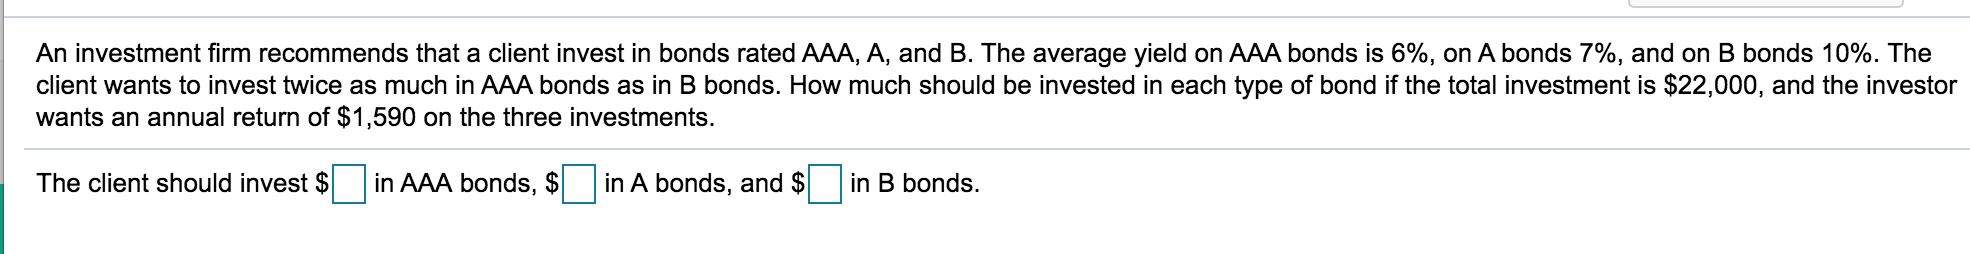 An investment firm recommends that a client invest in bonds rated AAA, A, and B. The average yield on AAA bonds is 6%, on A bonds 7%, and on B bonds 10%. The
client wants to invest twice as much in AAA bonds as in B bonds. How much should be invested in each type of bond if the total investment is $22,000, and the investor
wants an annual return of $1,590 on the three investments.
The client should invest $
in AAA bonds, $
in A bonds, and $
in B bonds.
